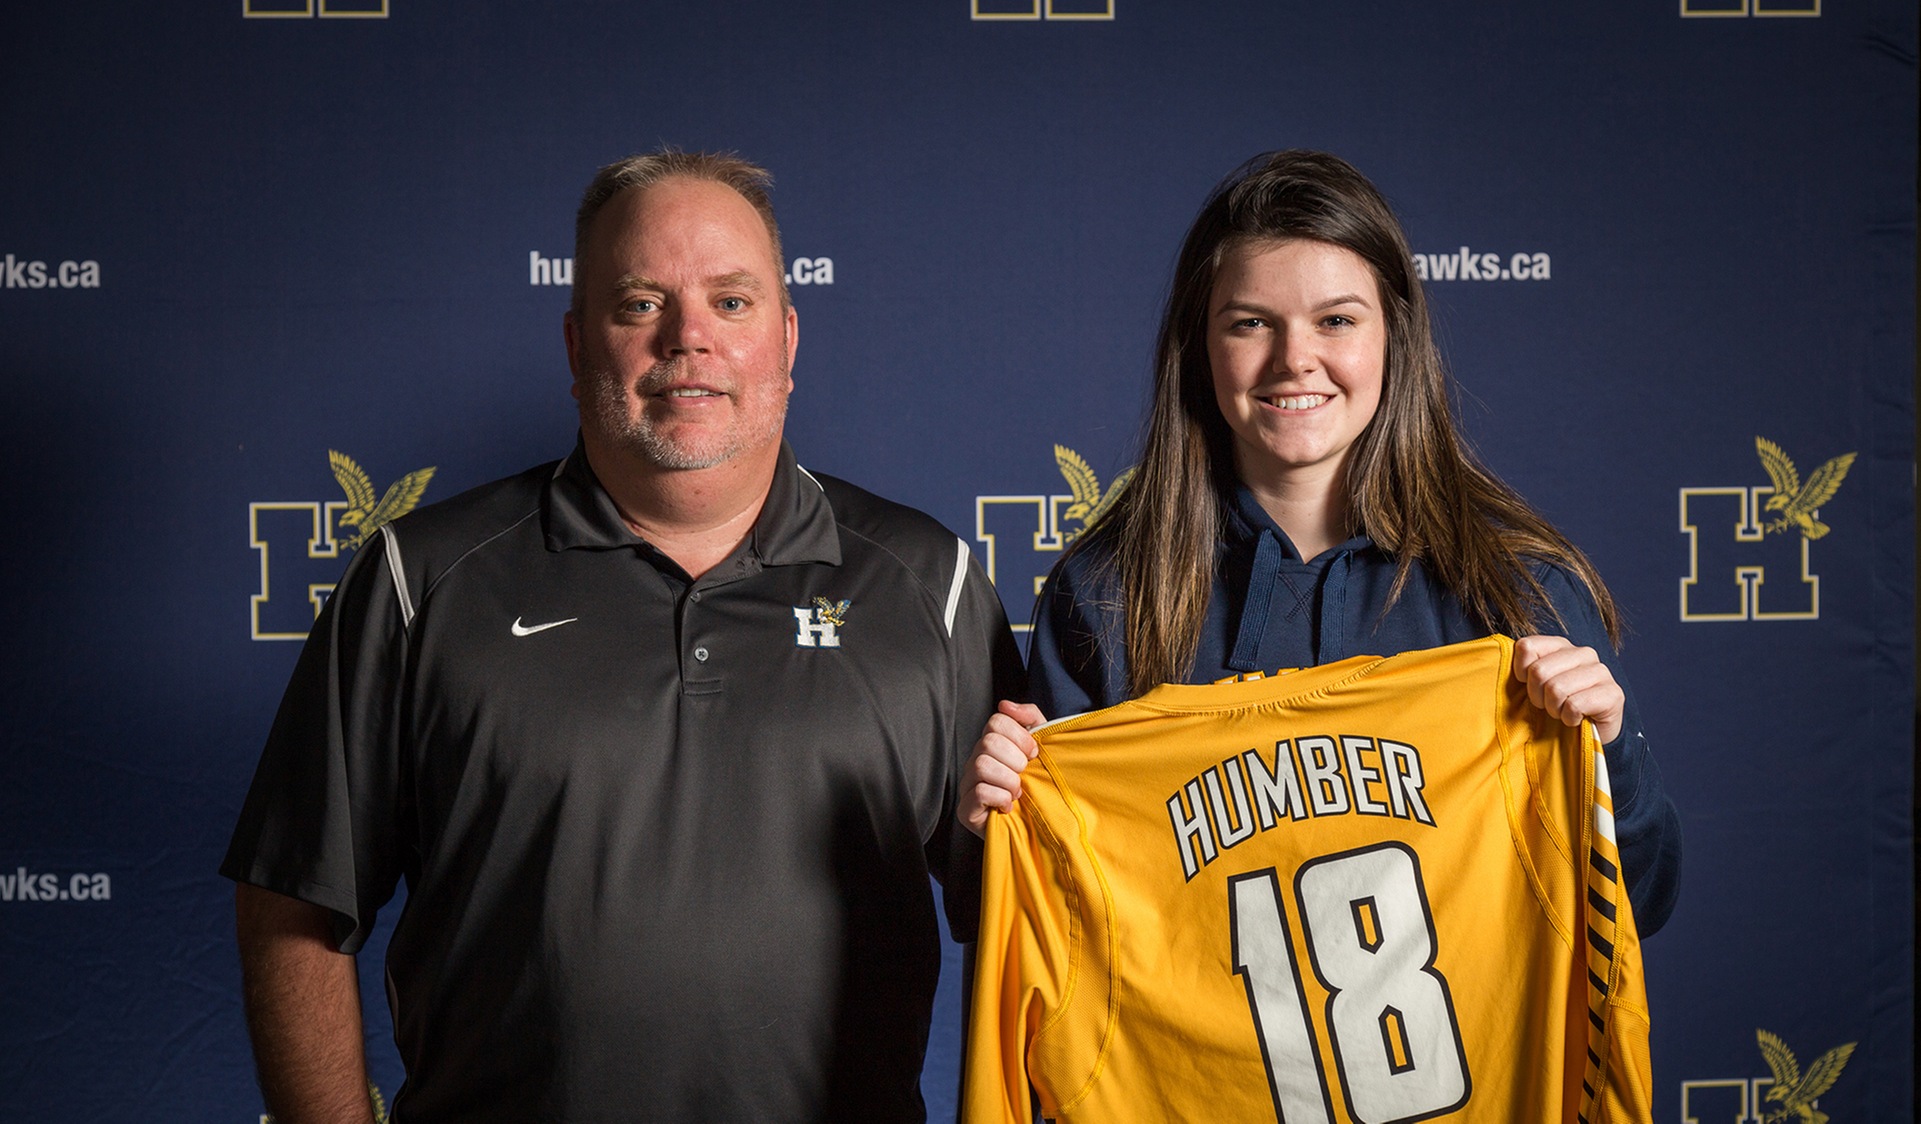 HENDERSON SET TO JOIN DEFENDING OCAA CHAMPIONS